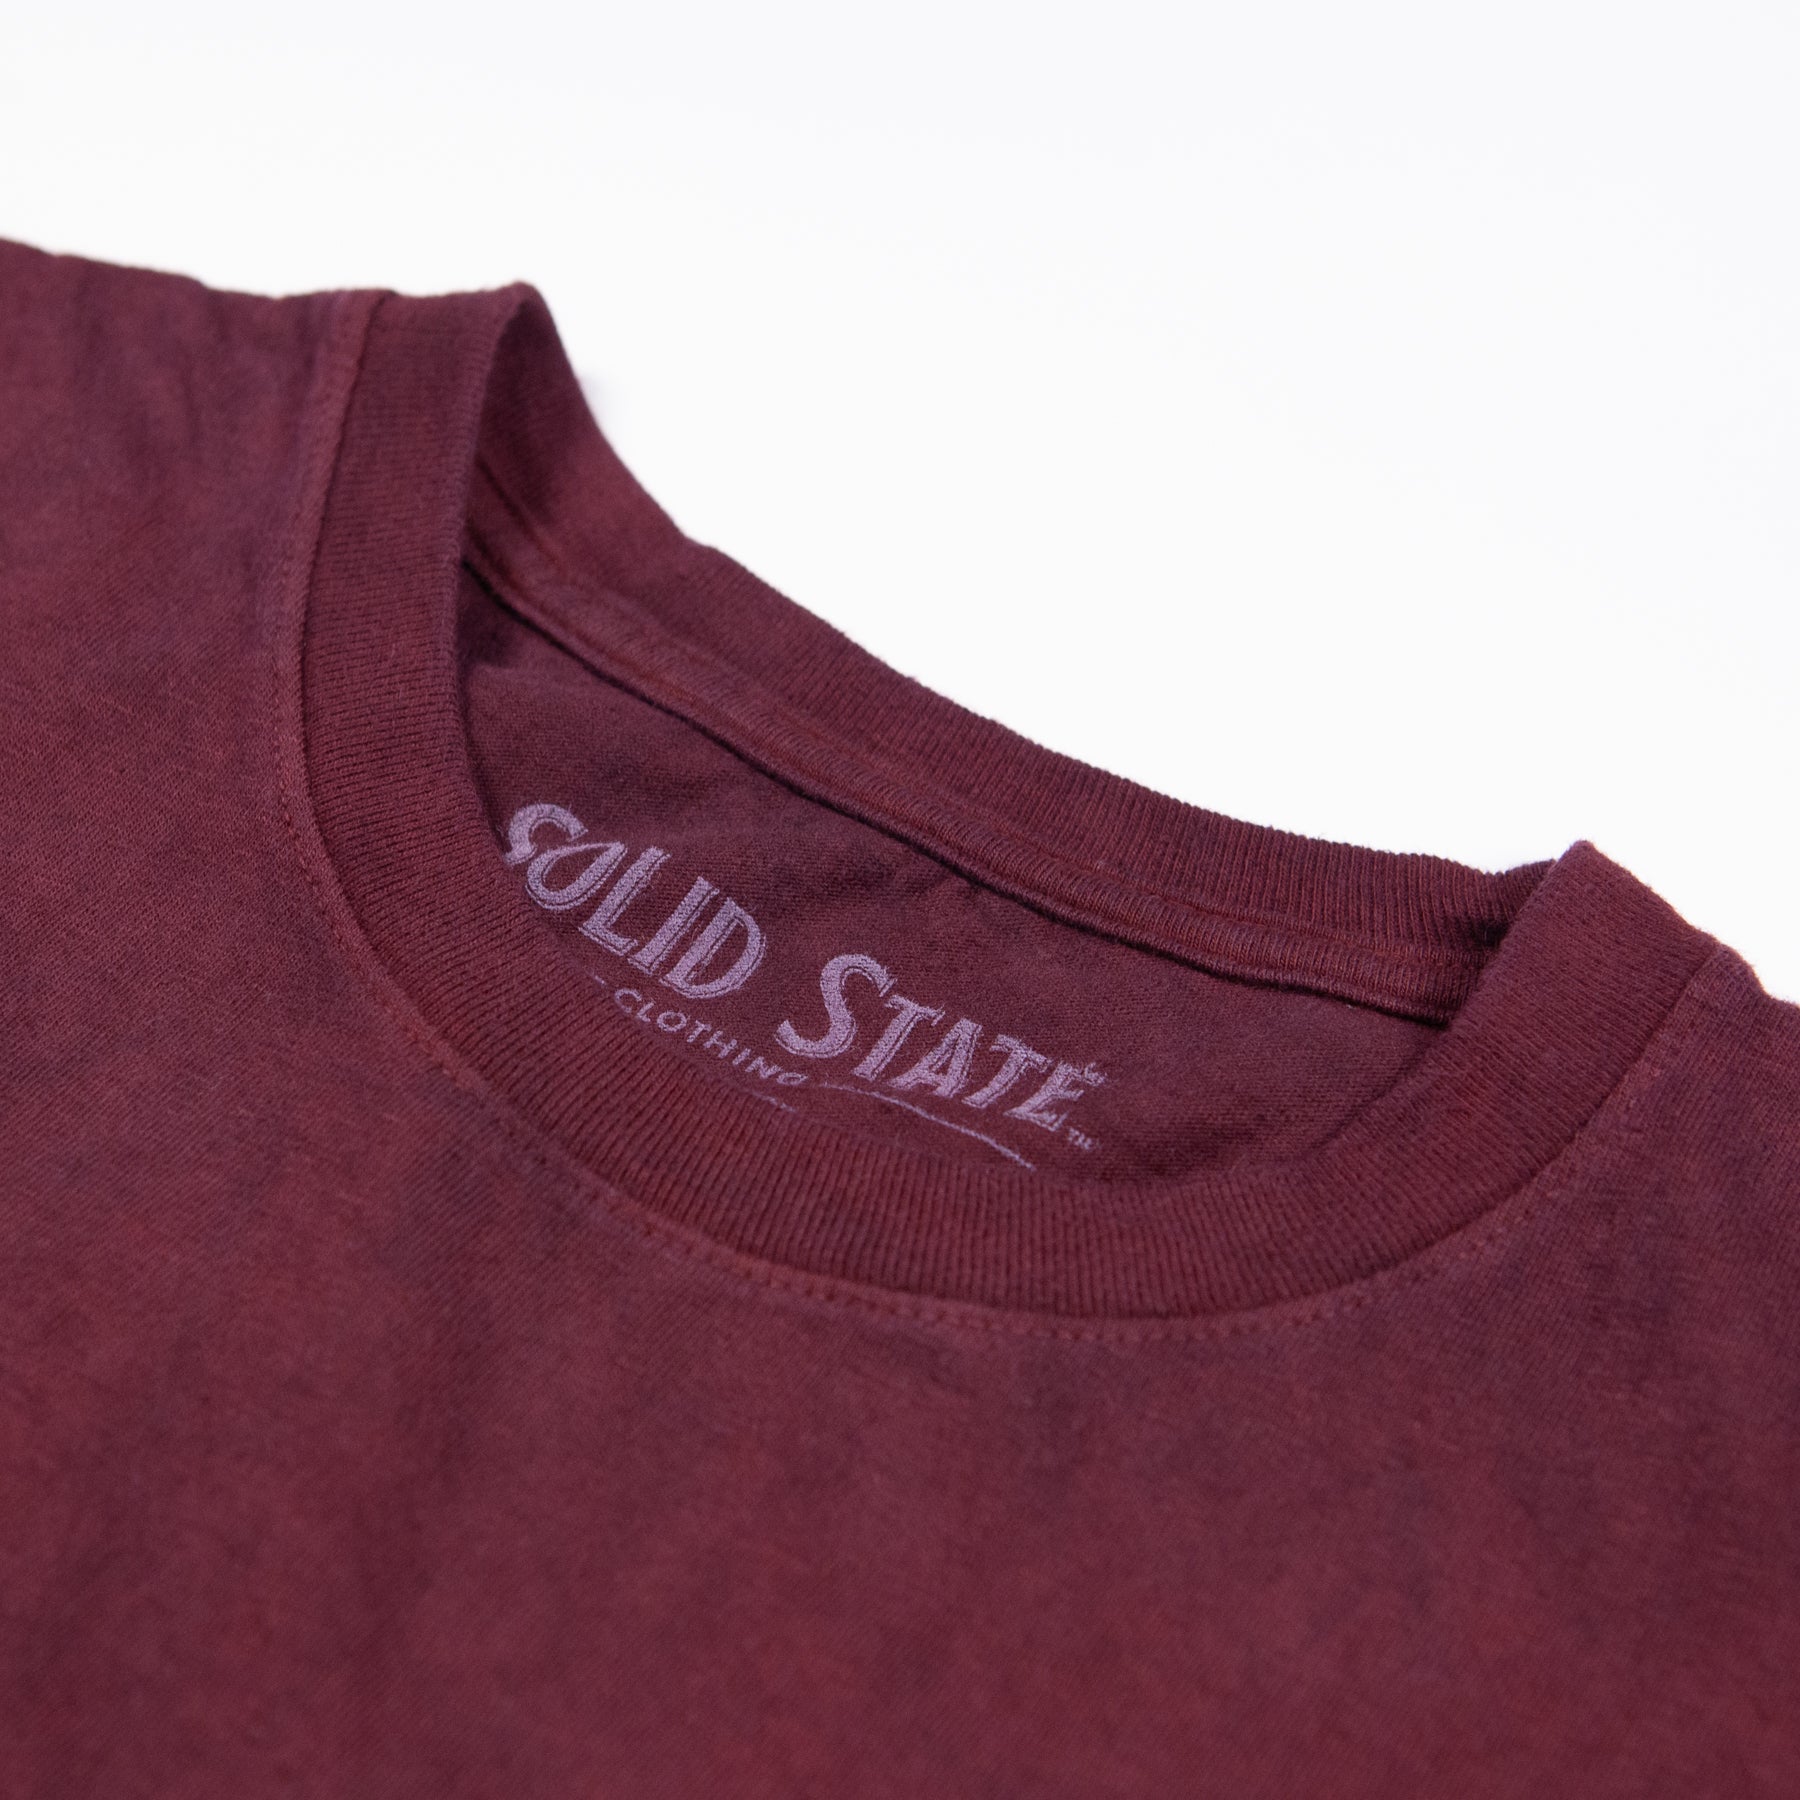 A close-up of  the neckline of a crewneck t-shirt made in the USA and dyed with madder root standing laying flat on a white background. A label printed inside the neck reads "Solid State Clothing."